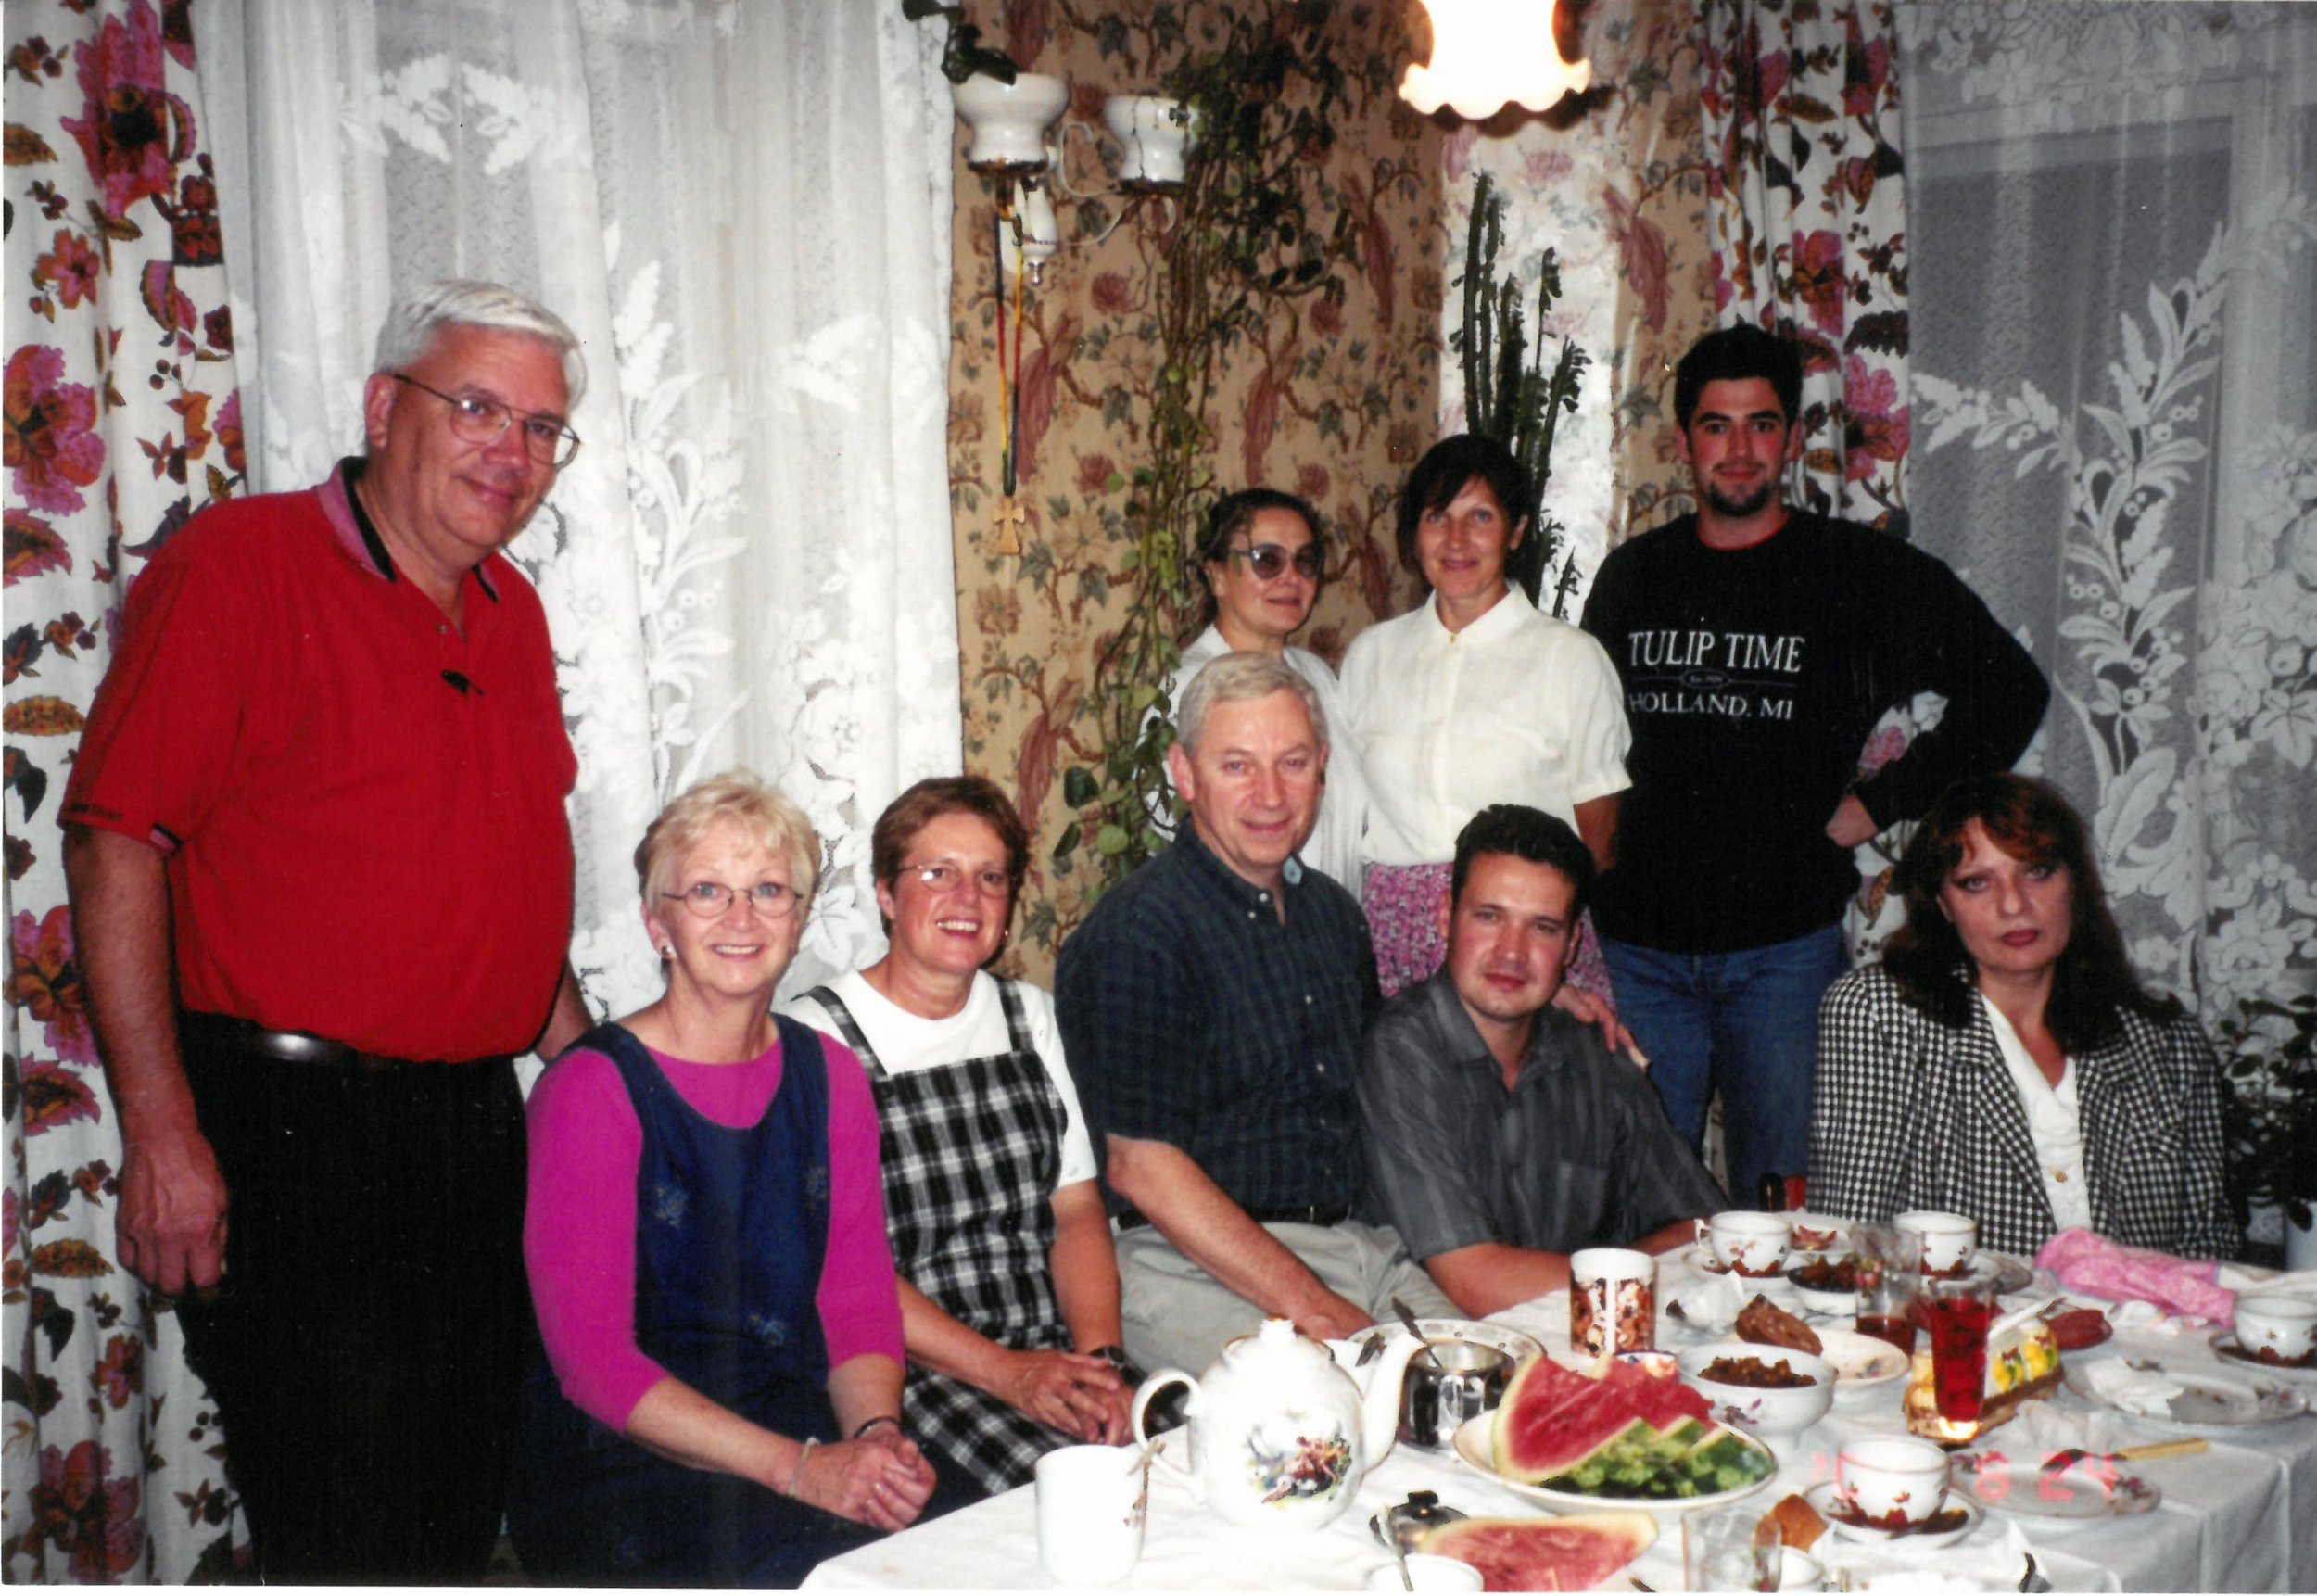  While serving in Russia. L to R, Larry n Bette Johnson, Jane n Darrel Turner, and Russian friends in Vladimir, Russia. 2001. 